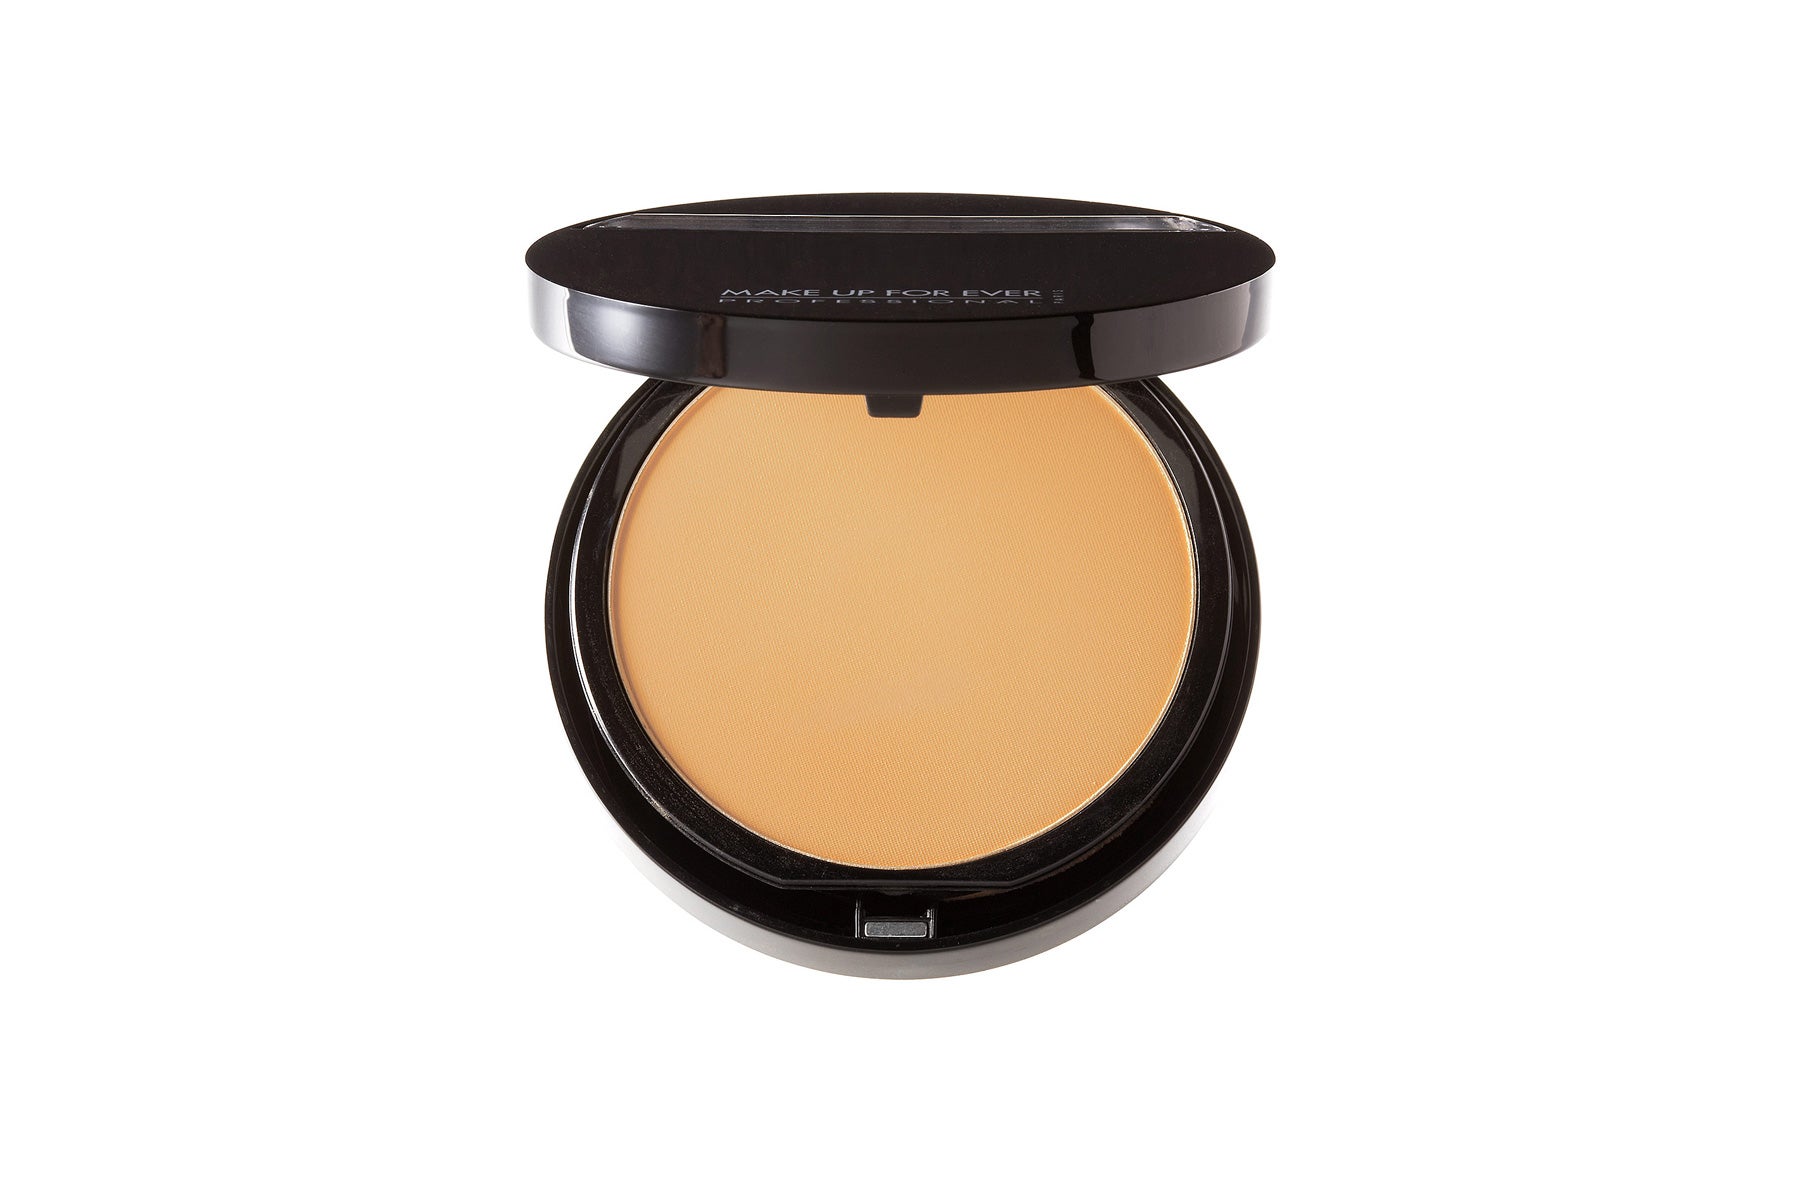 The Best Mattifying Foundations